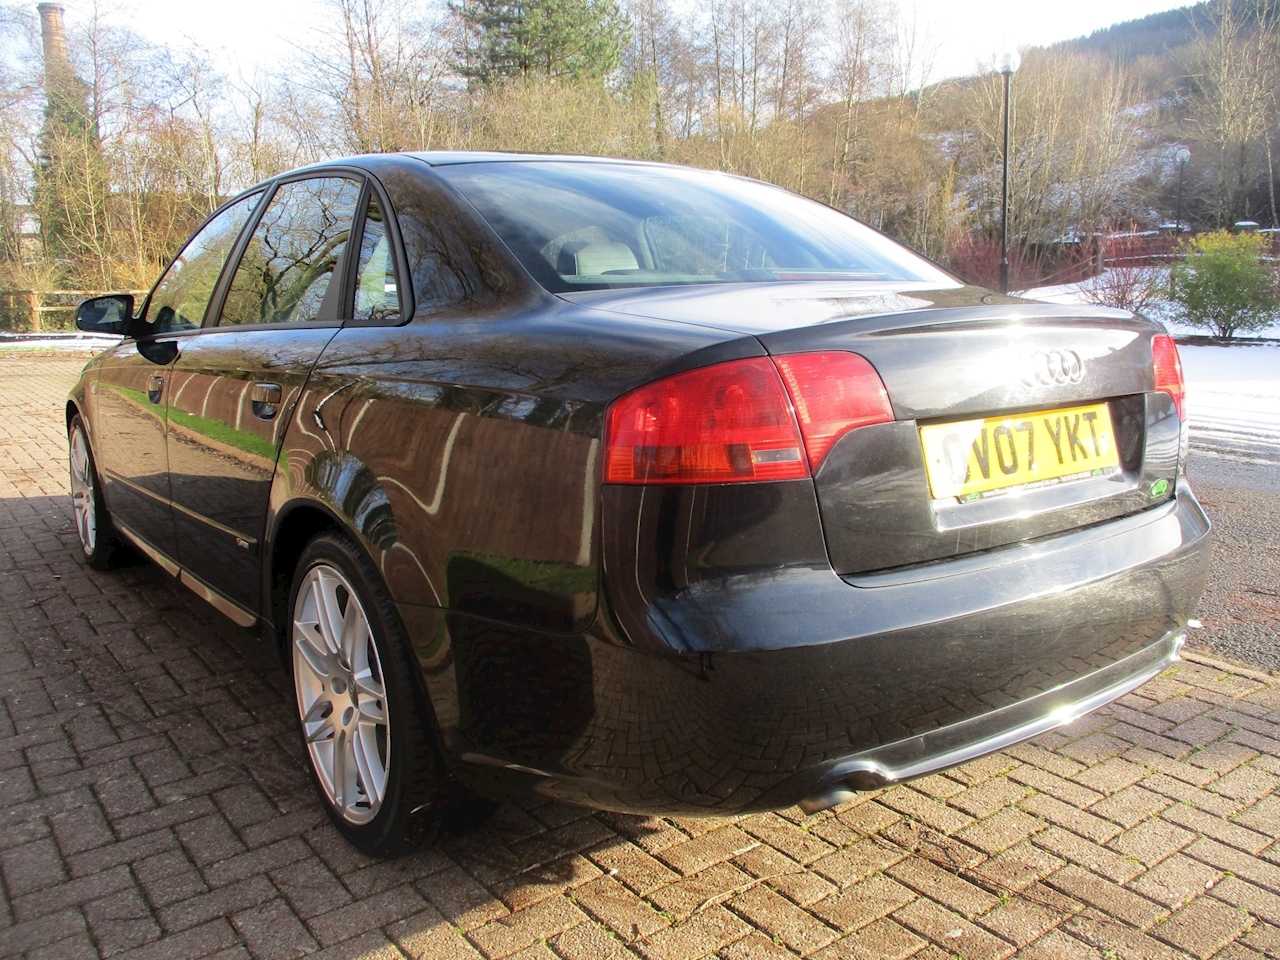 2.0 TDI S line Special Edition Saloon 4dr Diesel Manual (154 g/km, 168 bhp)